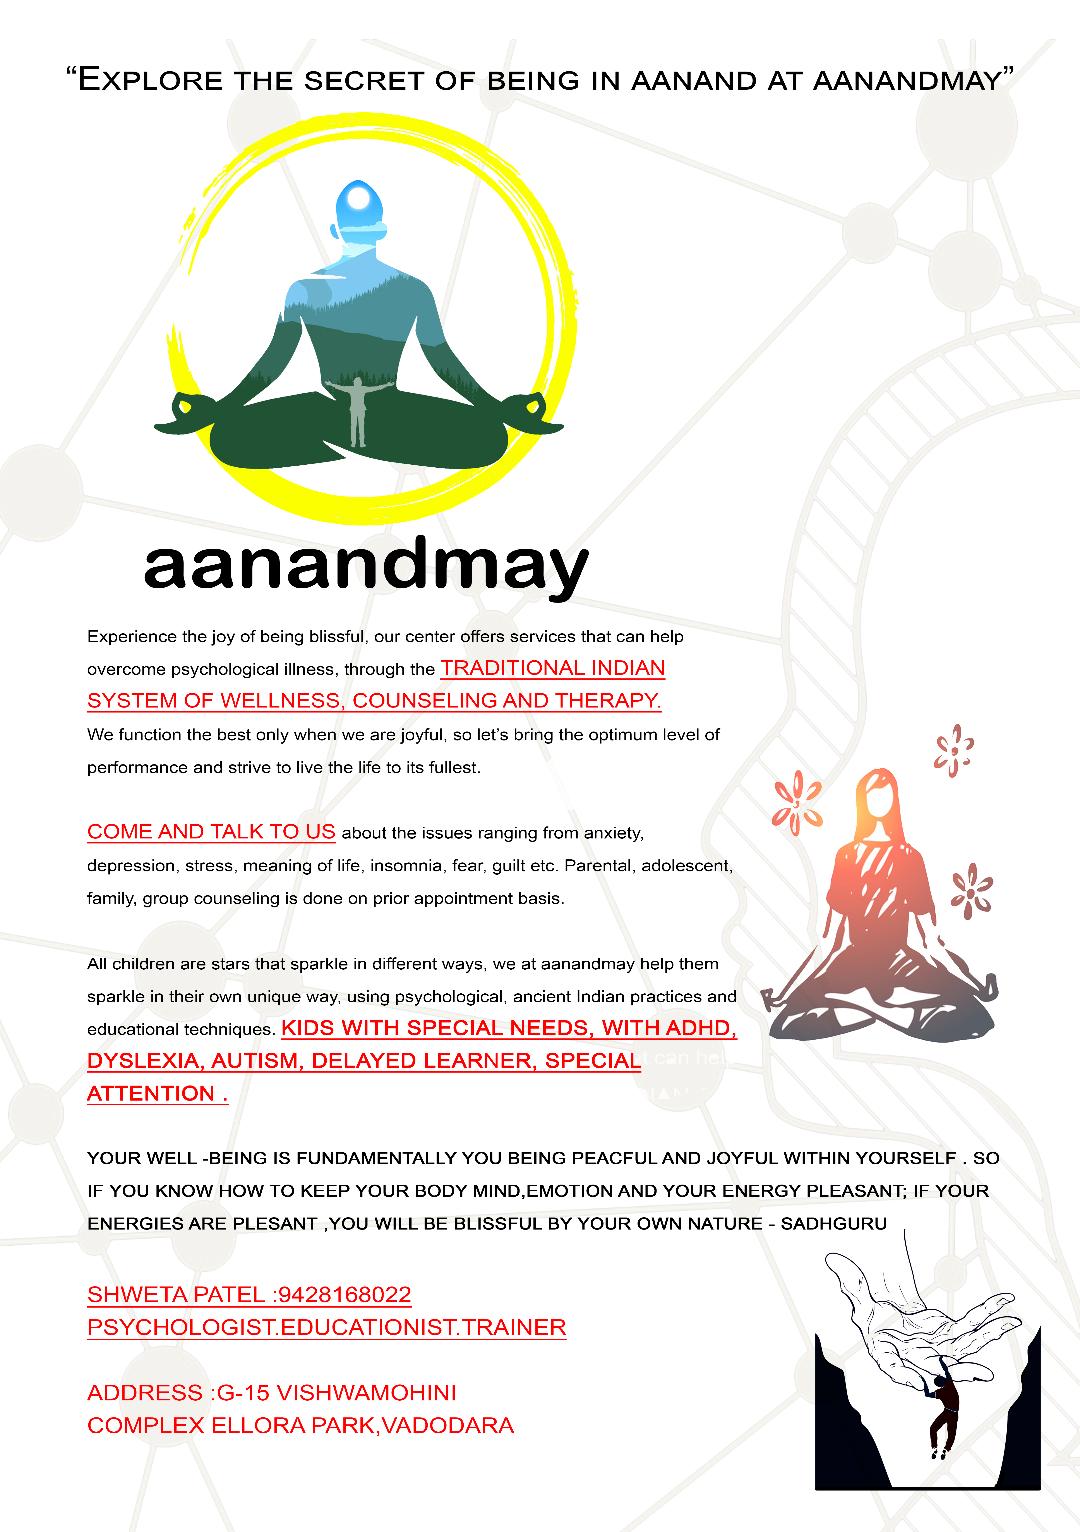 Aanandmay | Shweta Patel - Psychologist, Vedic Counselor, A centre for Holistic Well being..